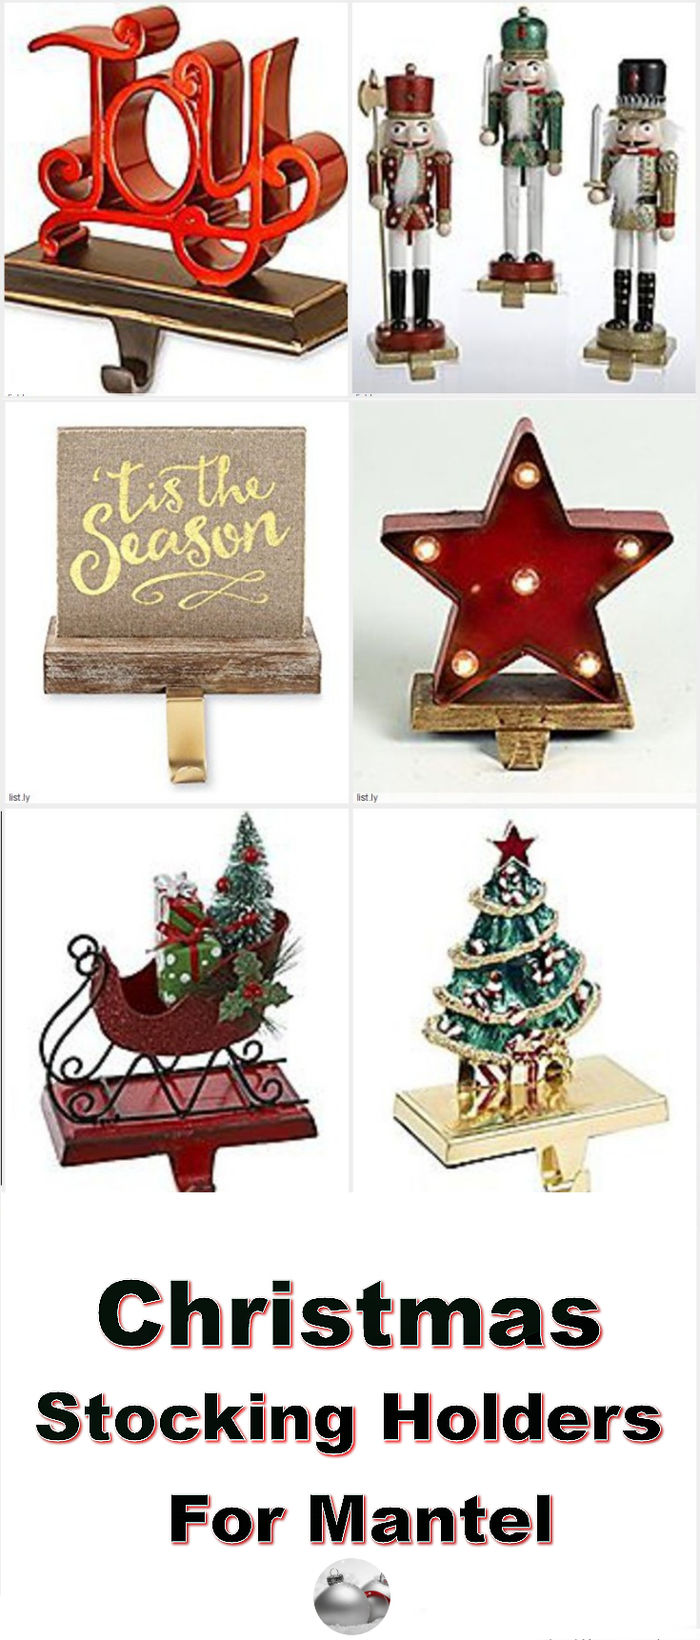 Christmas Stocking Holders For Mantle | A Listly List